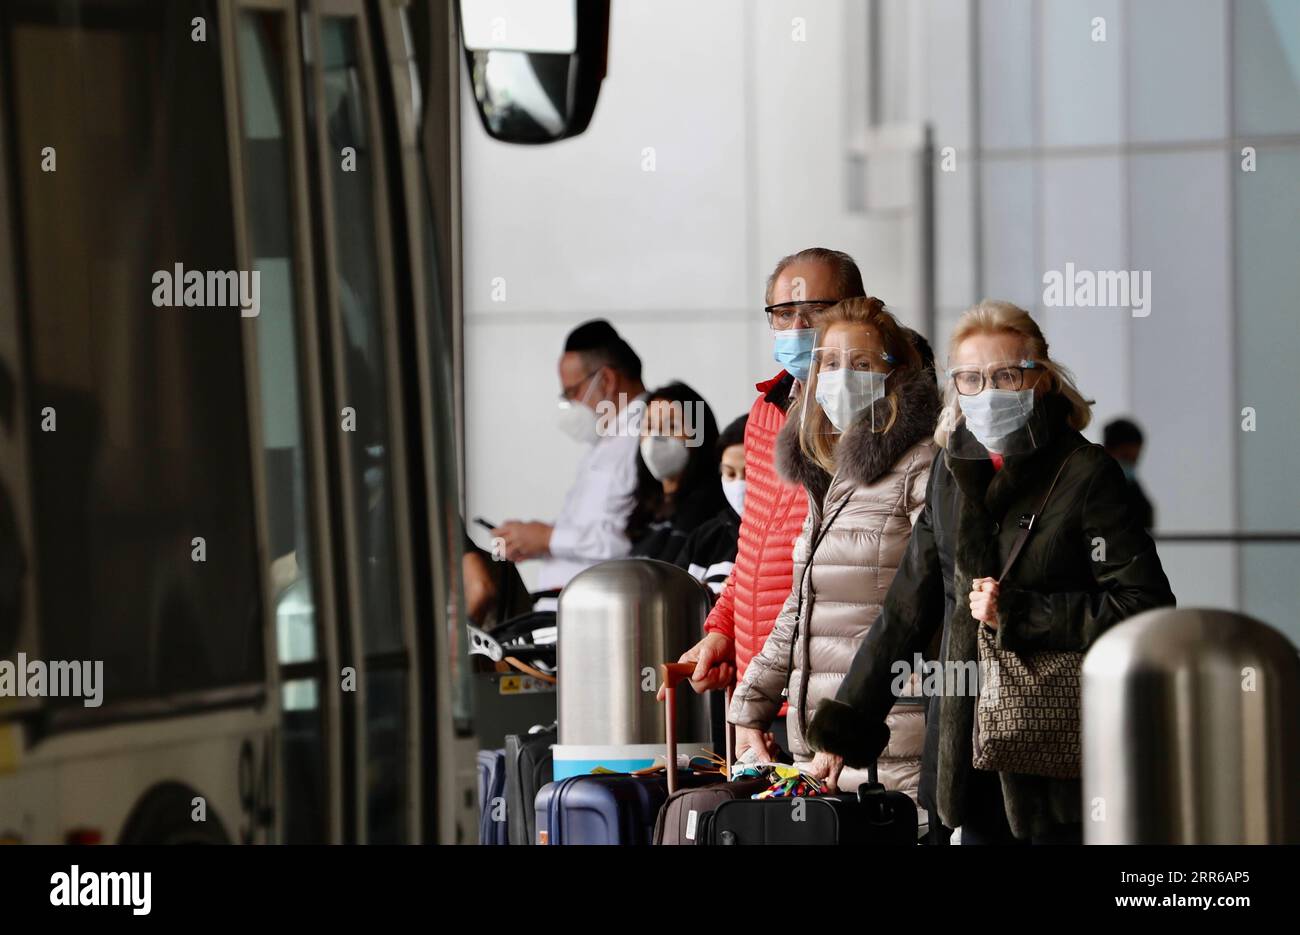 210203 -- BEIJING, Feb. 3, 2021  -- Travelers with face masks wait for public transportation services at the International Airport in Los Angeles, California, the United States, on Feb. 1, 2021. Beginning Tuesday, Americans are required to wear face masks while traveling on domestic public transport as part of a national strategy to curb the spread of COVID-19. The rule, issued by the U.S. Centers for Disease Control and Prevention CDC, applies to passengers on airplanes, trains, subways, buses, taxis and ride-shares. And it extends to waiting areas such as airports, train platforms and subway Stock Photo